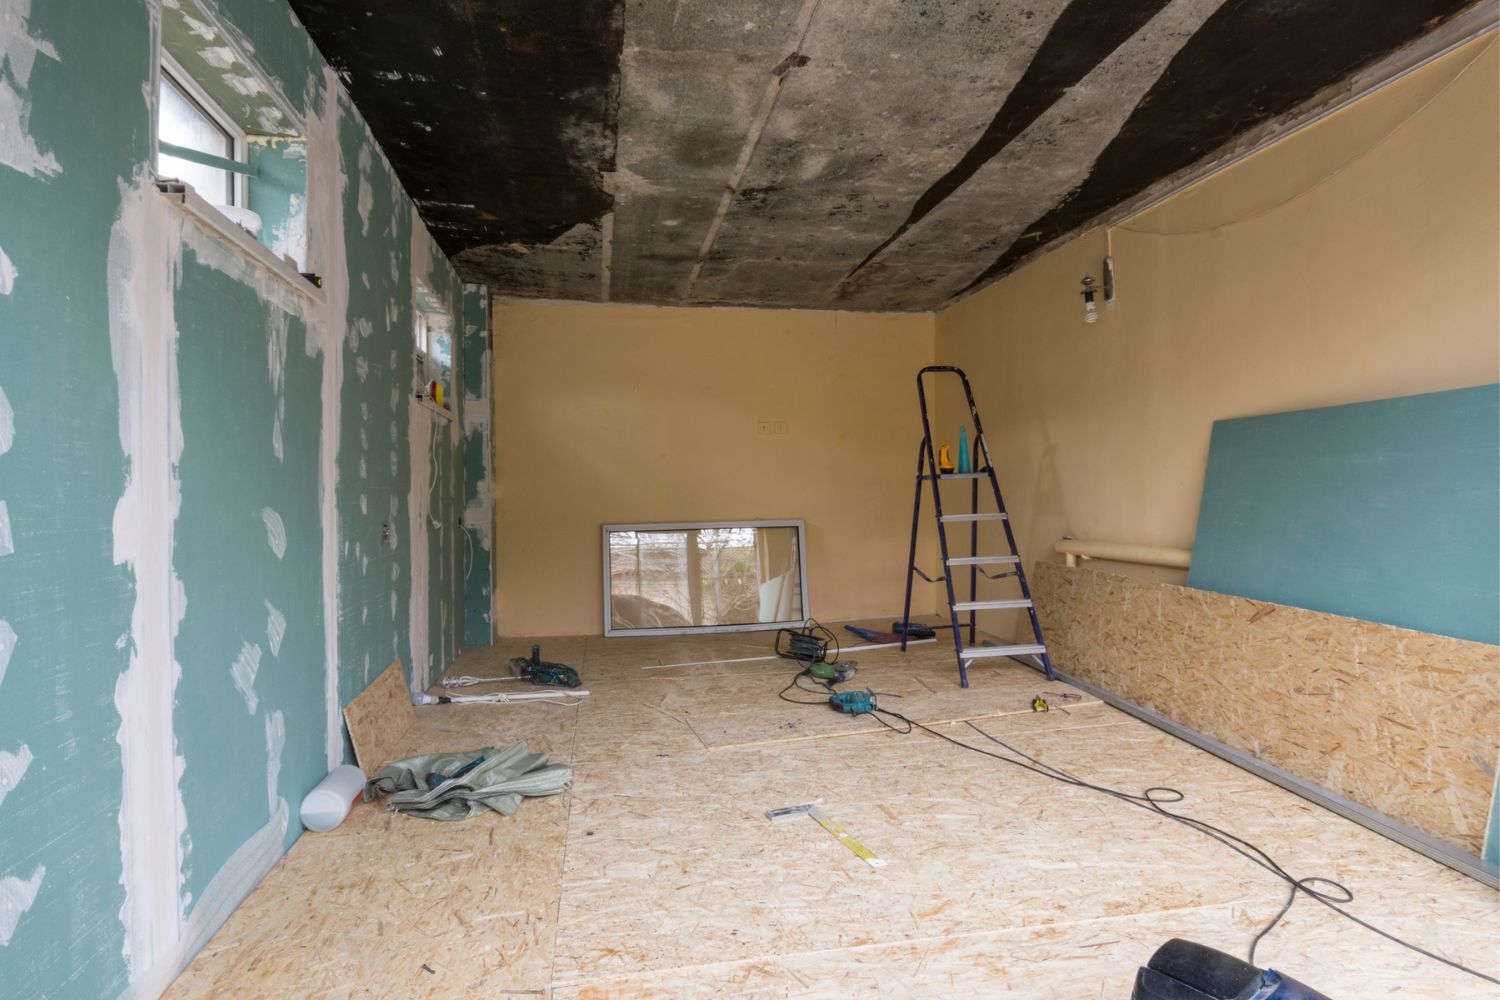 Soundproofing a Room: The Two Best Ways to Dampen Noise Without Tearing Down Your Walls